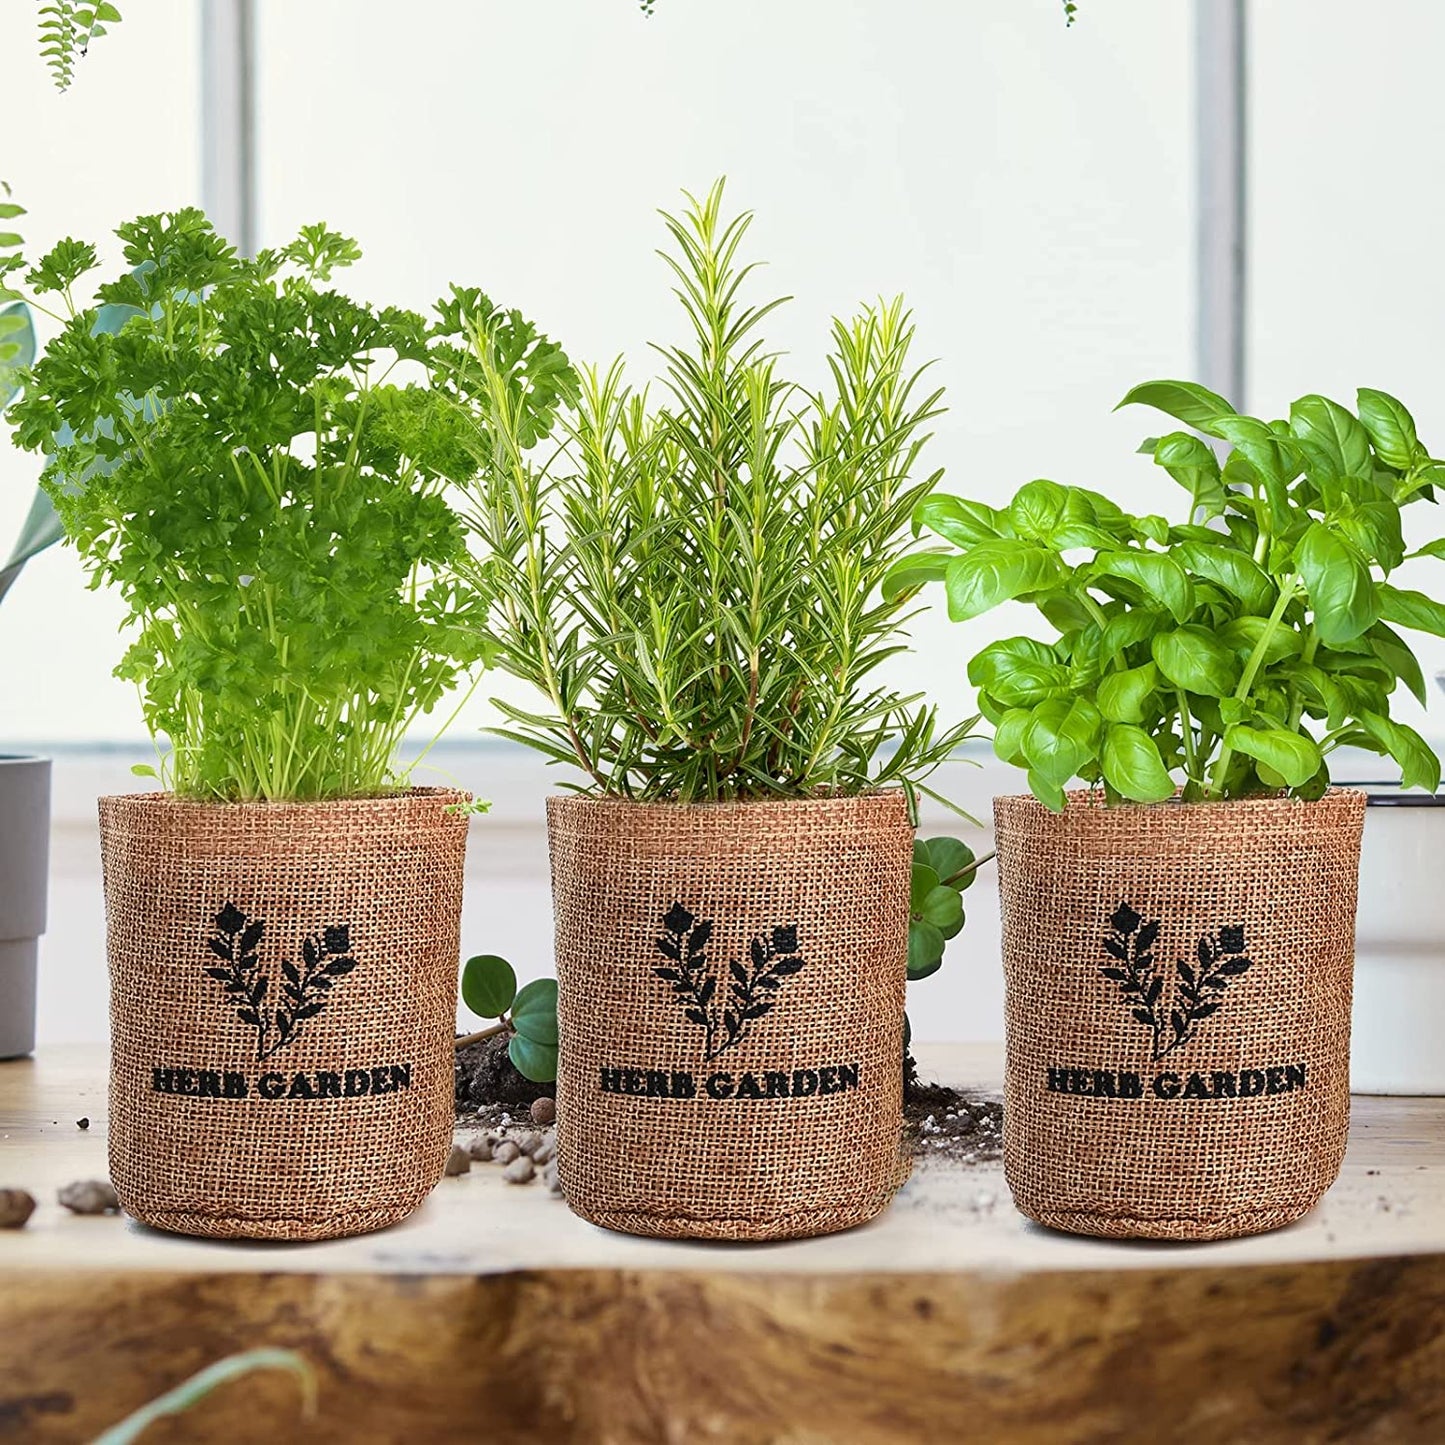 Indoor Herb Grow Kit, 5 Herb Seeds Garden Starter Kit with Complete Planting Kit & Wooden Flower Box, Growing into Basil, Parsley, Rosemary, Thyme, Mint for Kitchen Windowsill Herb Garden DIY